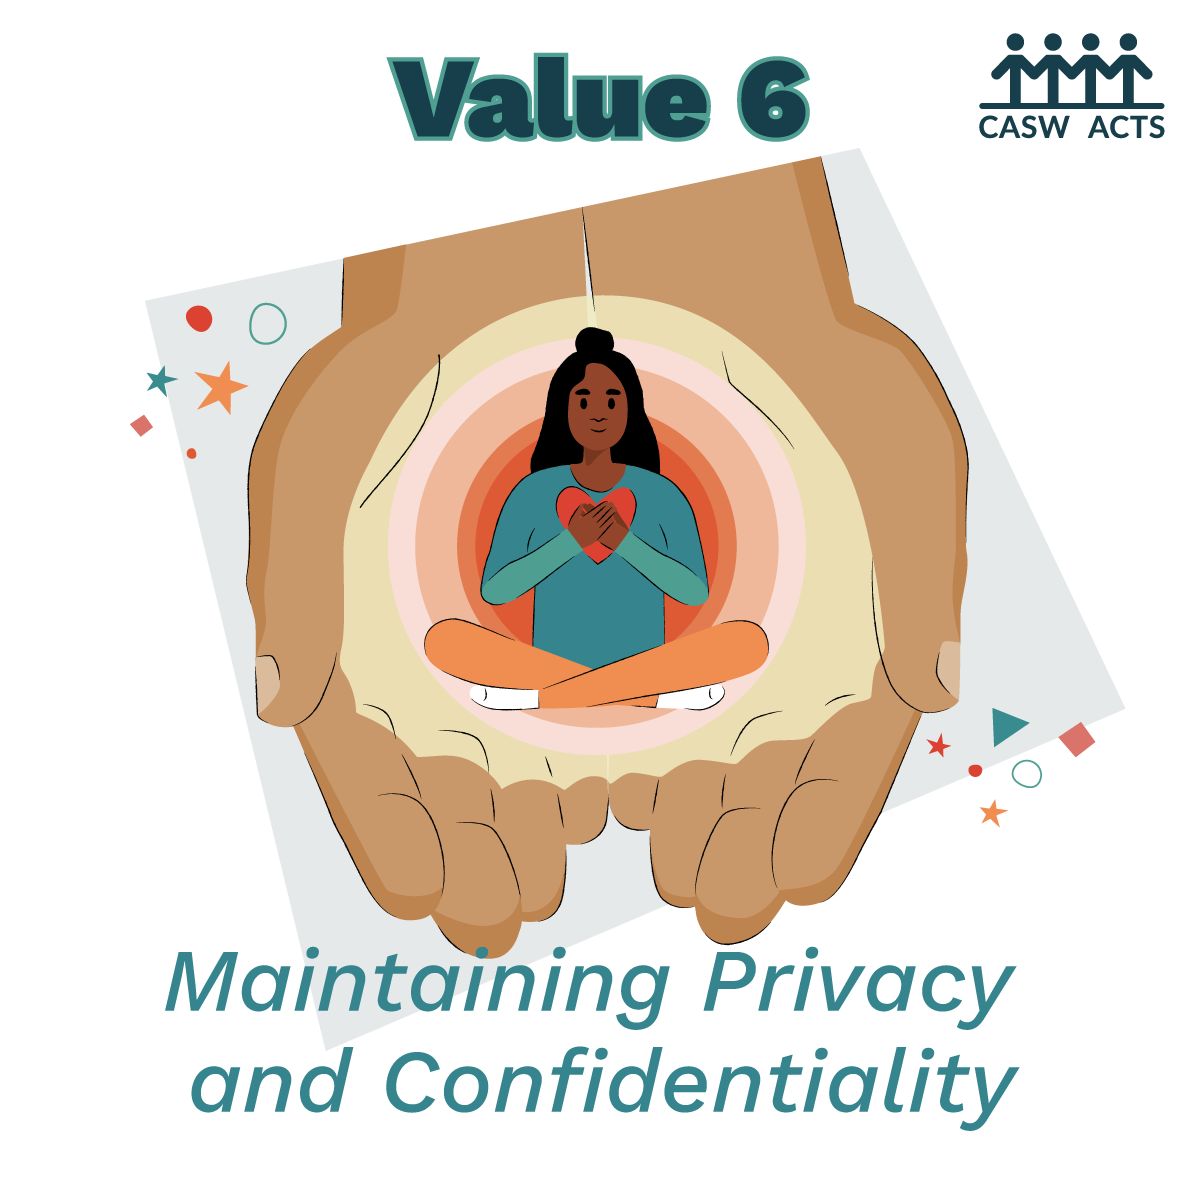 Today we shine a light on Value 6️⃣ of the new CASW Code of Ethics : Maintaining Privacy and Confidentiality. Learn about professional obligations and how to safeguard the trust placed in confidential relationships. Learn more here: casw-acts.ca/en/casw-code-e…